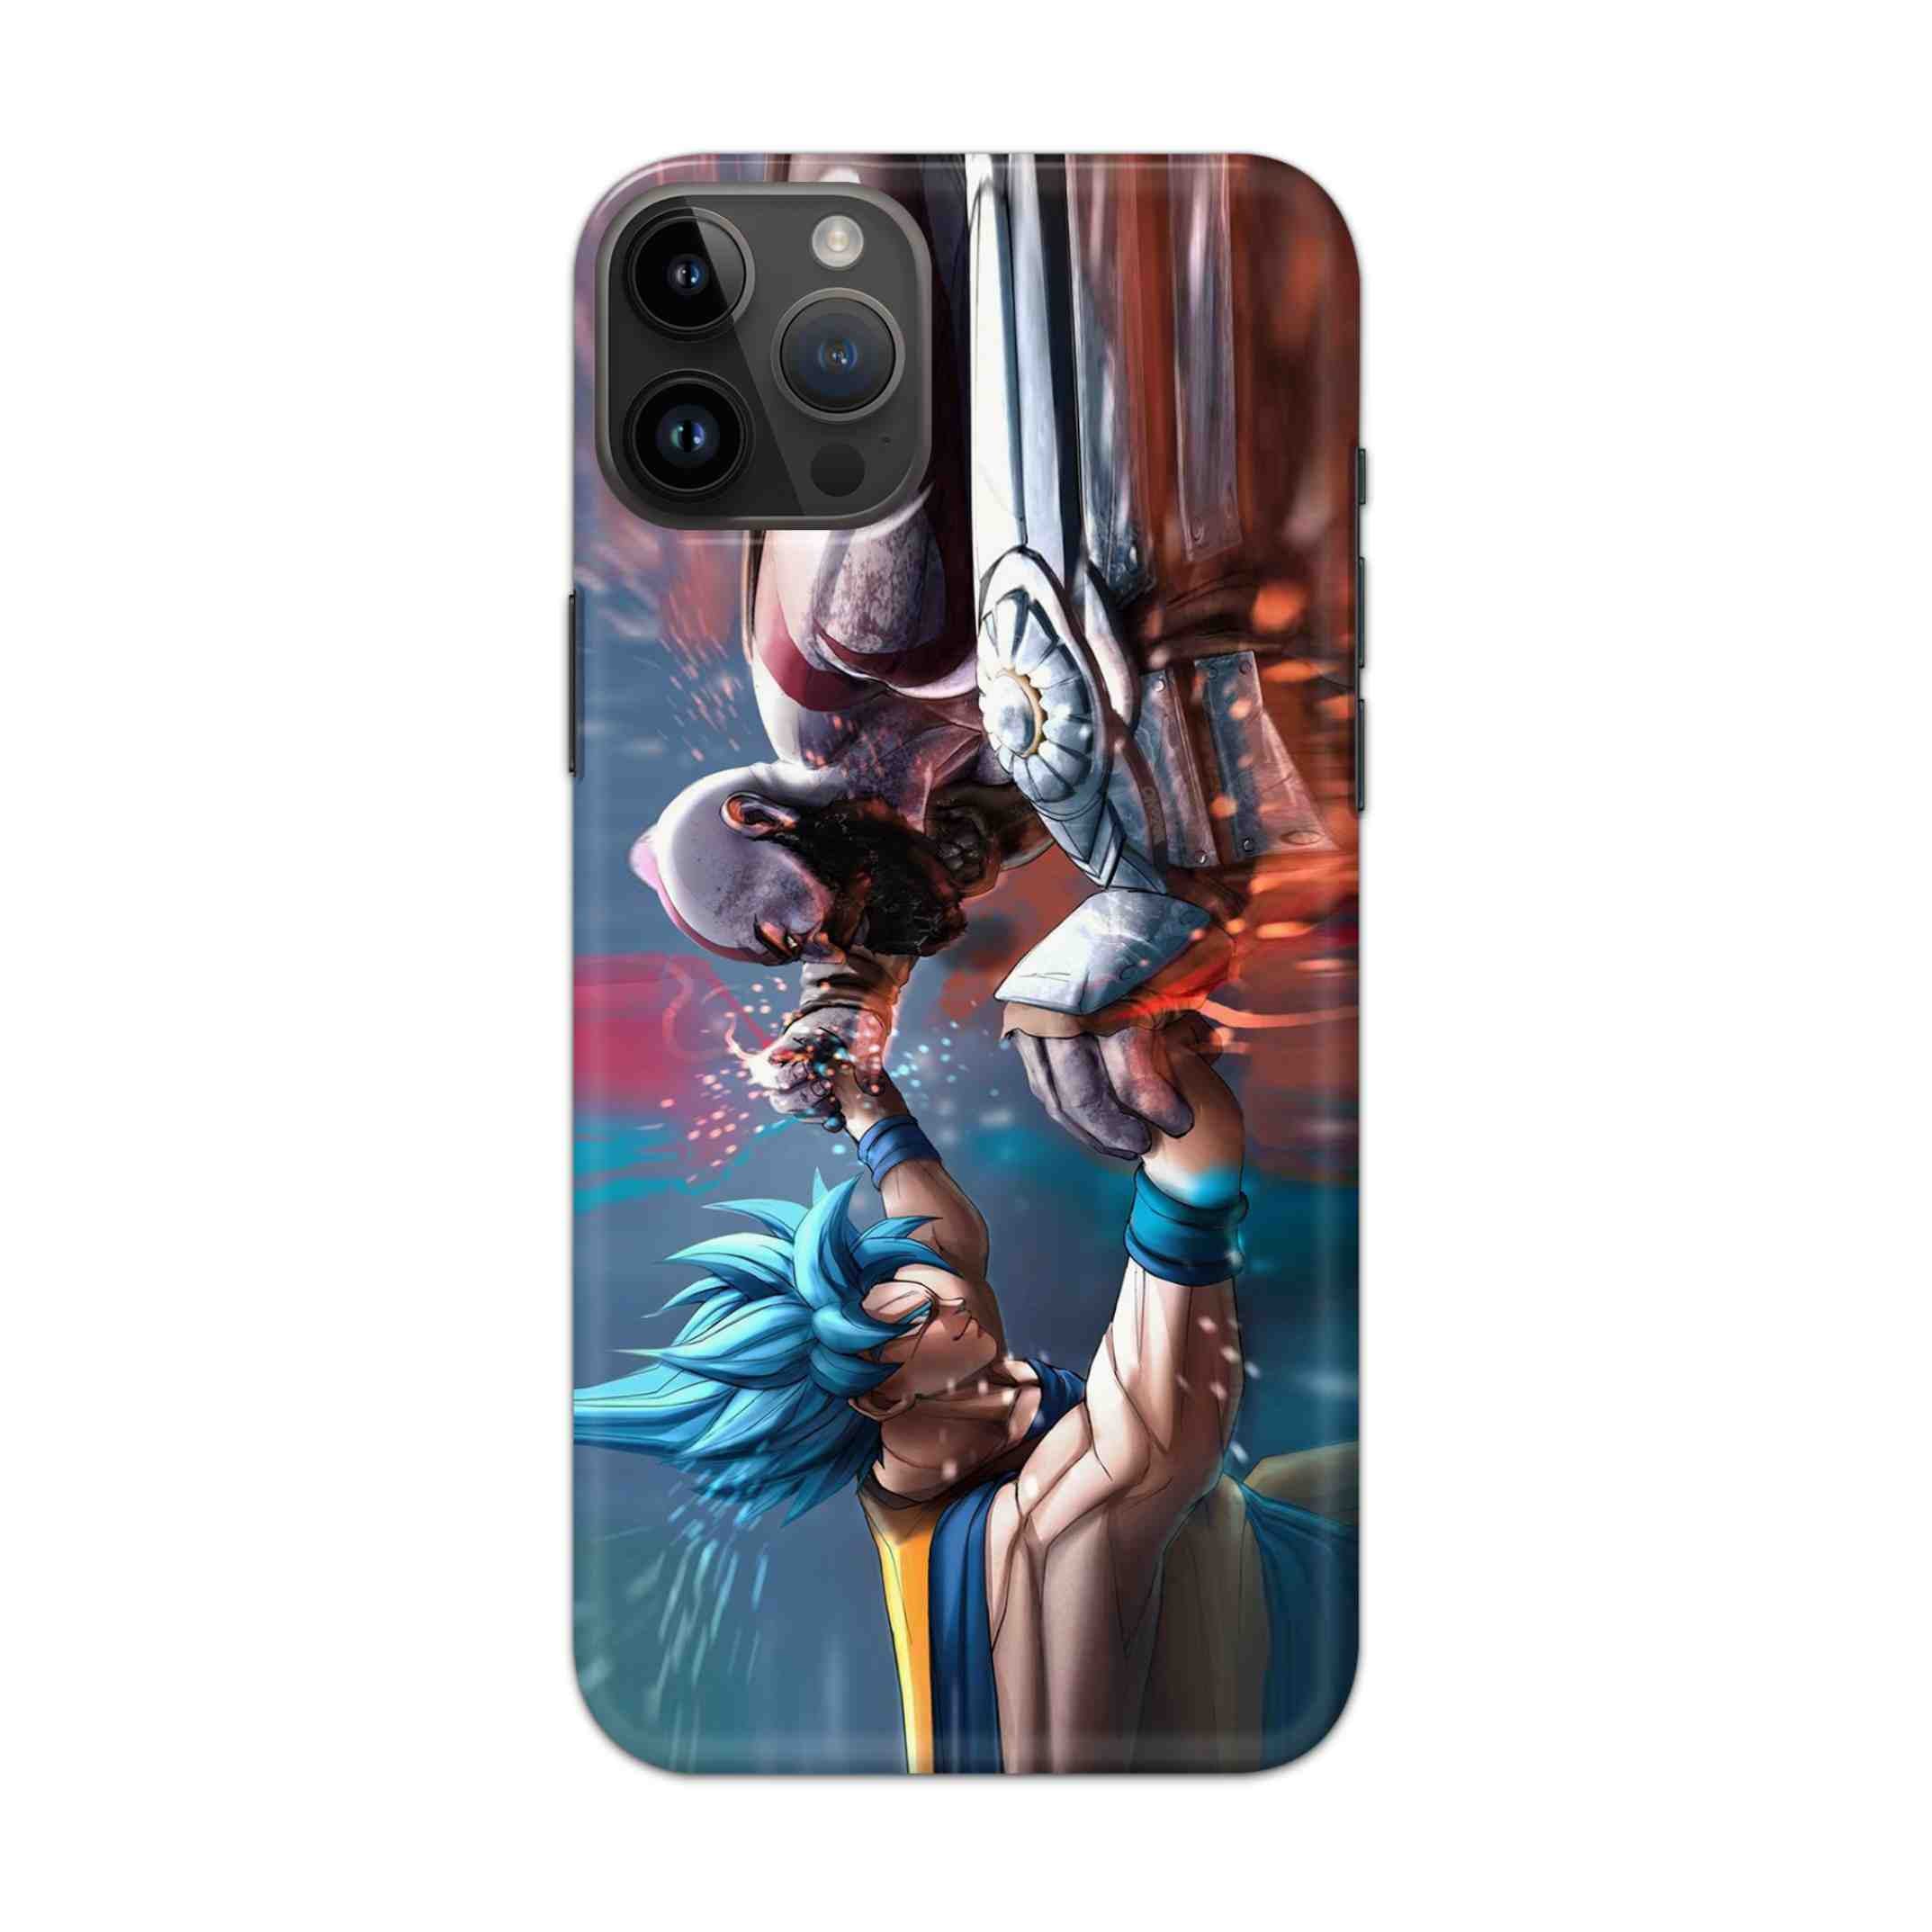 Buy Goku Vs Kratos Hard Back Mobile Phone Case/Cover For iPhone 14 Pro Max Online